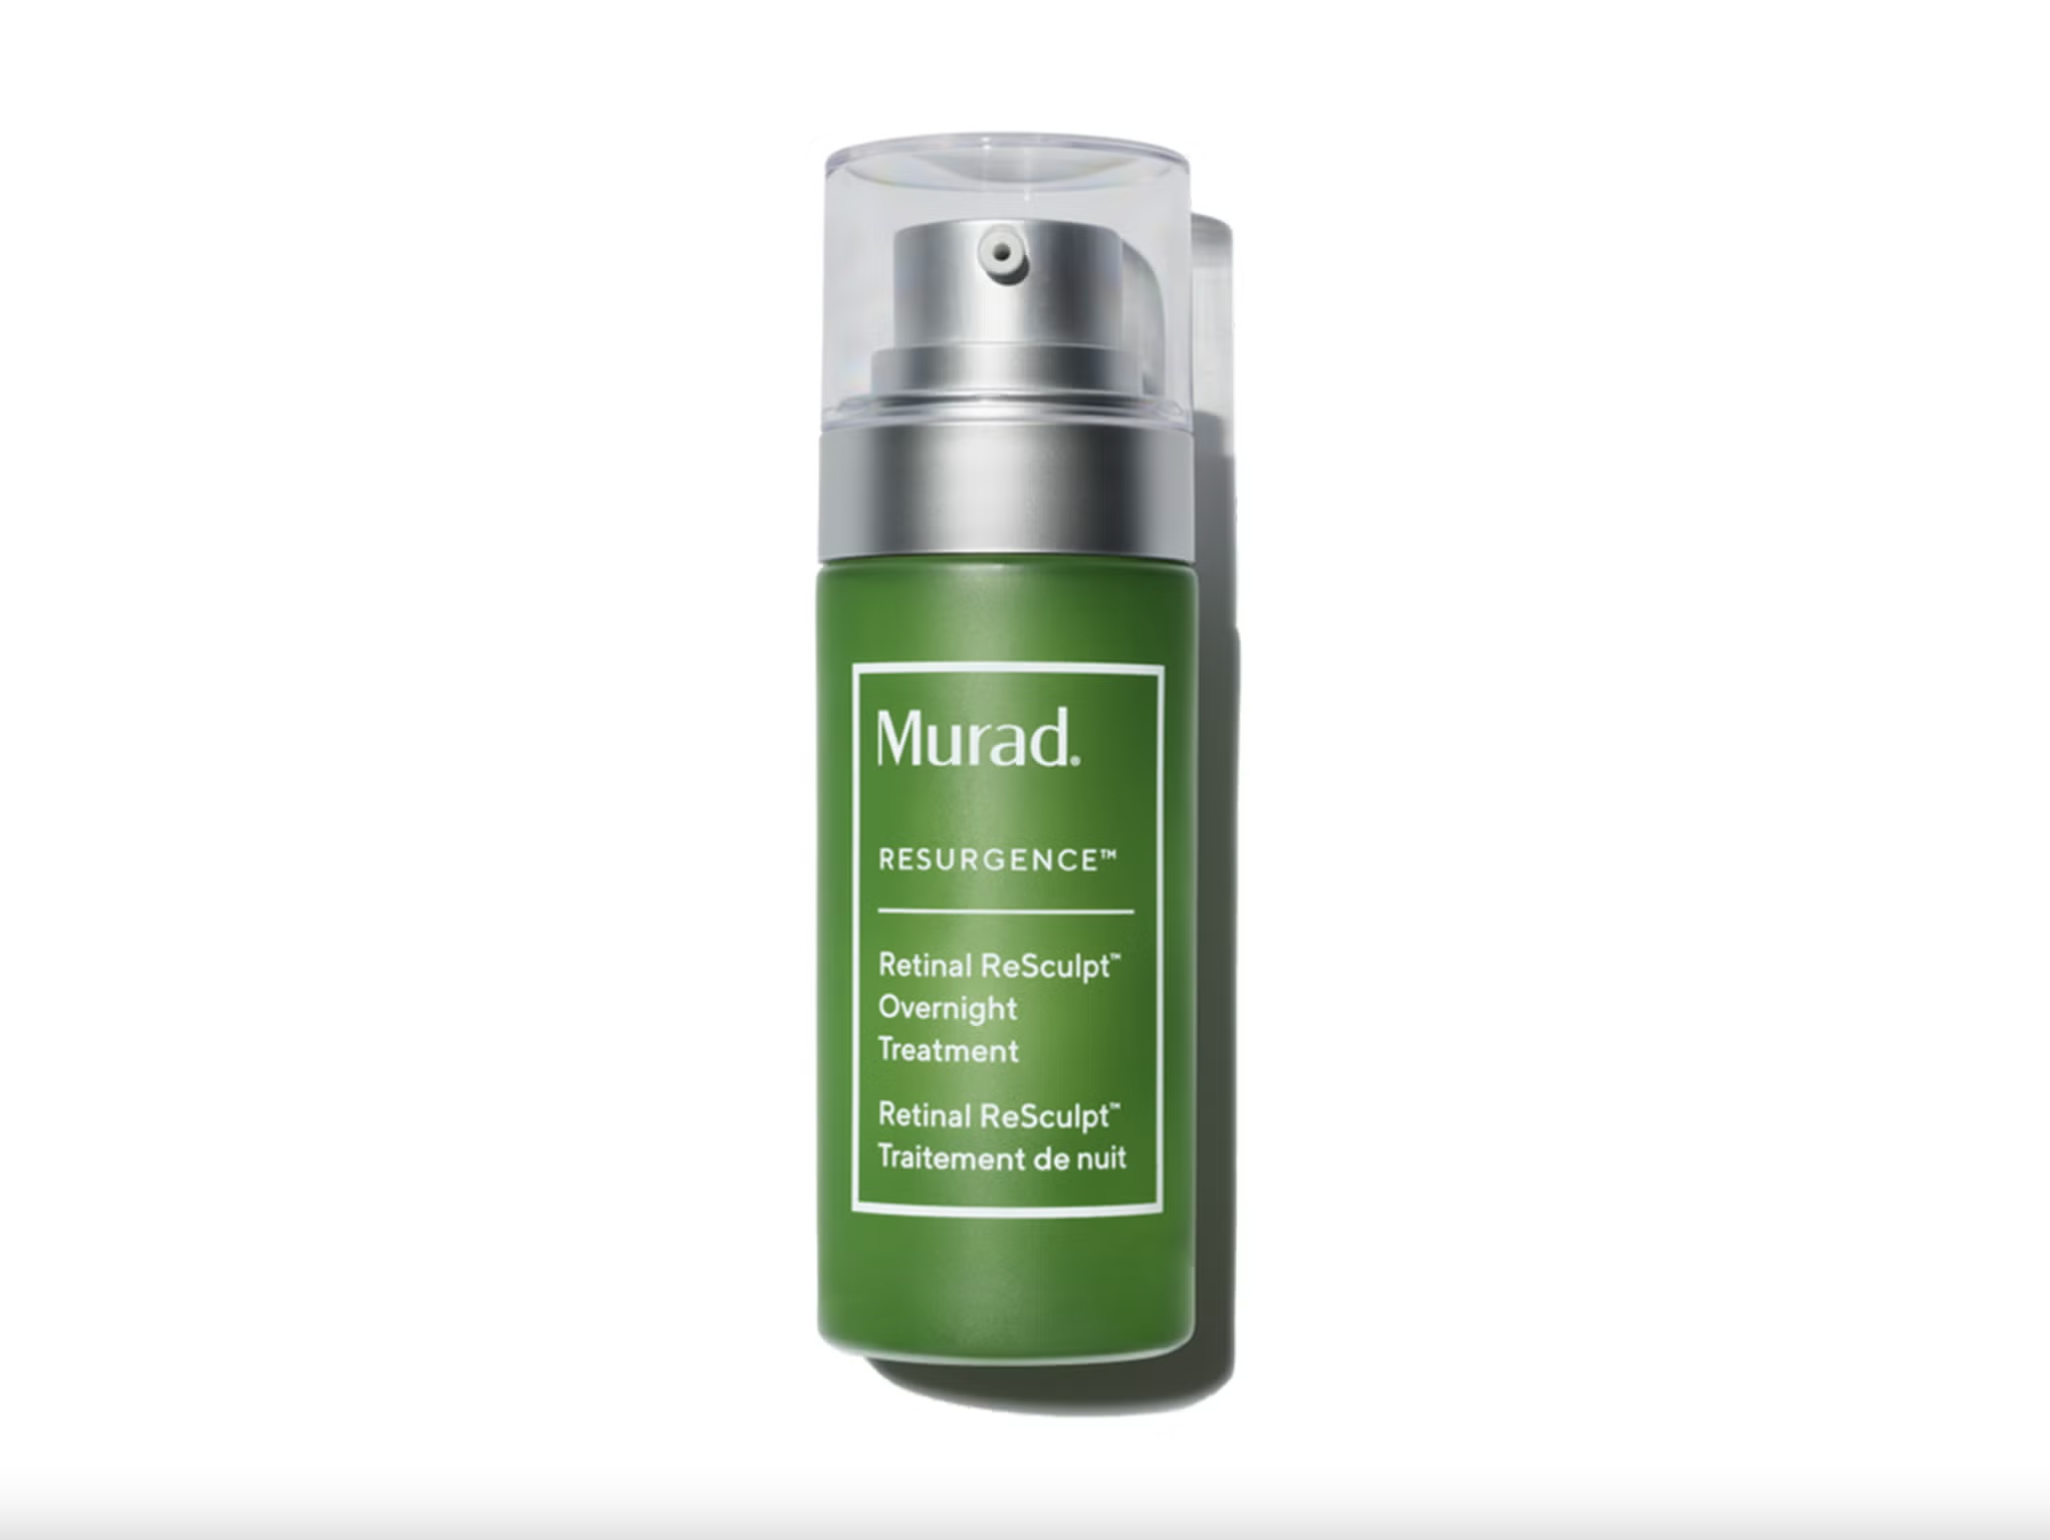 Our beauty writer loved this serum for treating fine lines